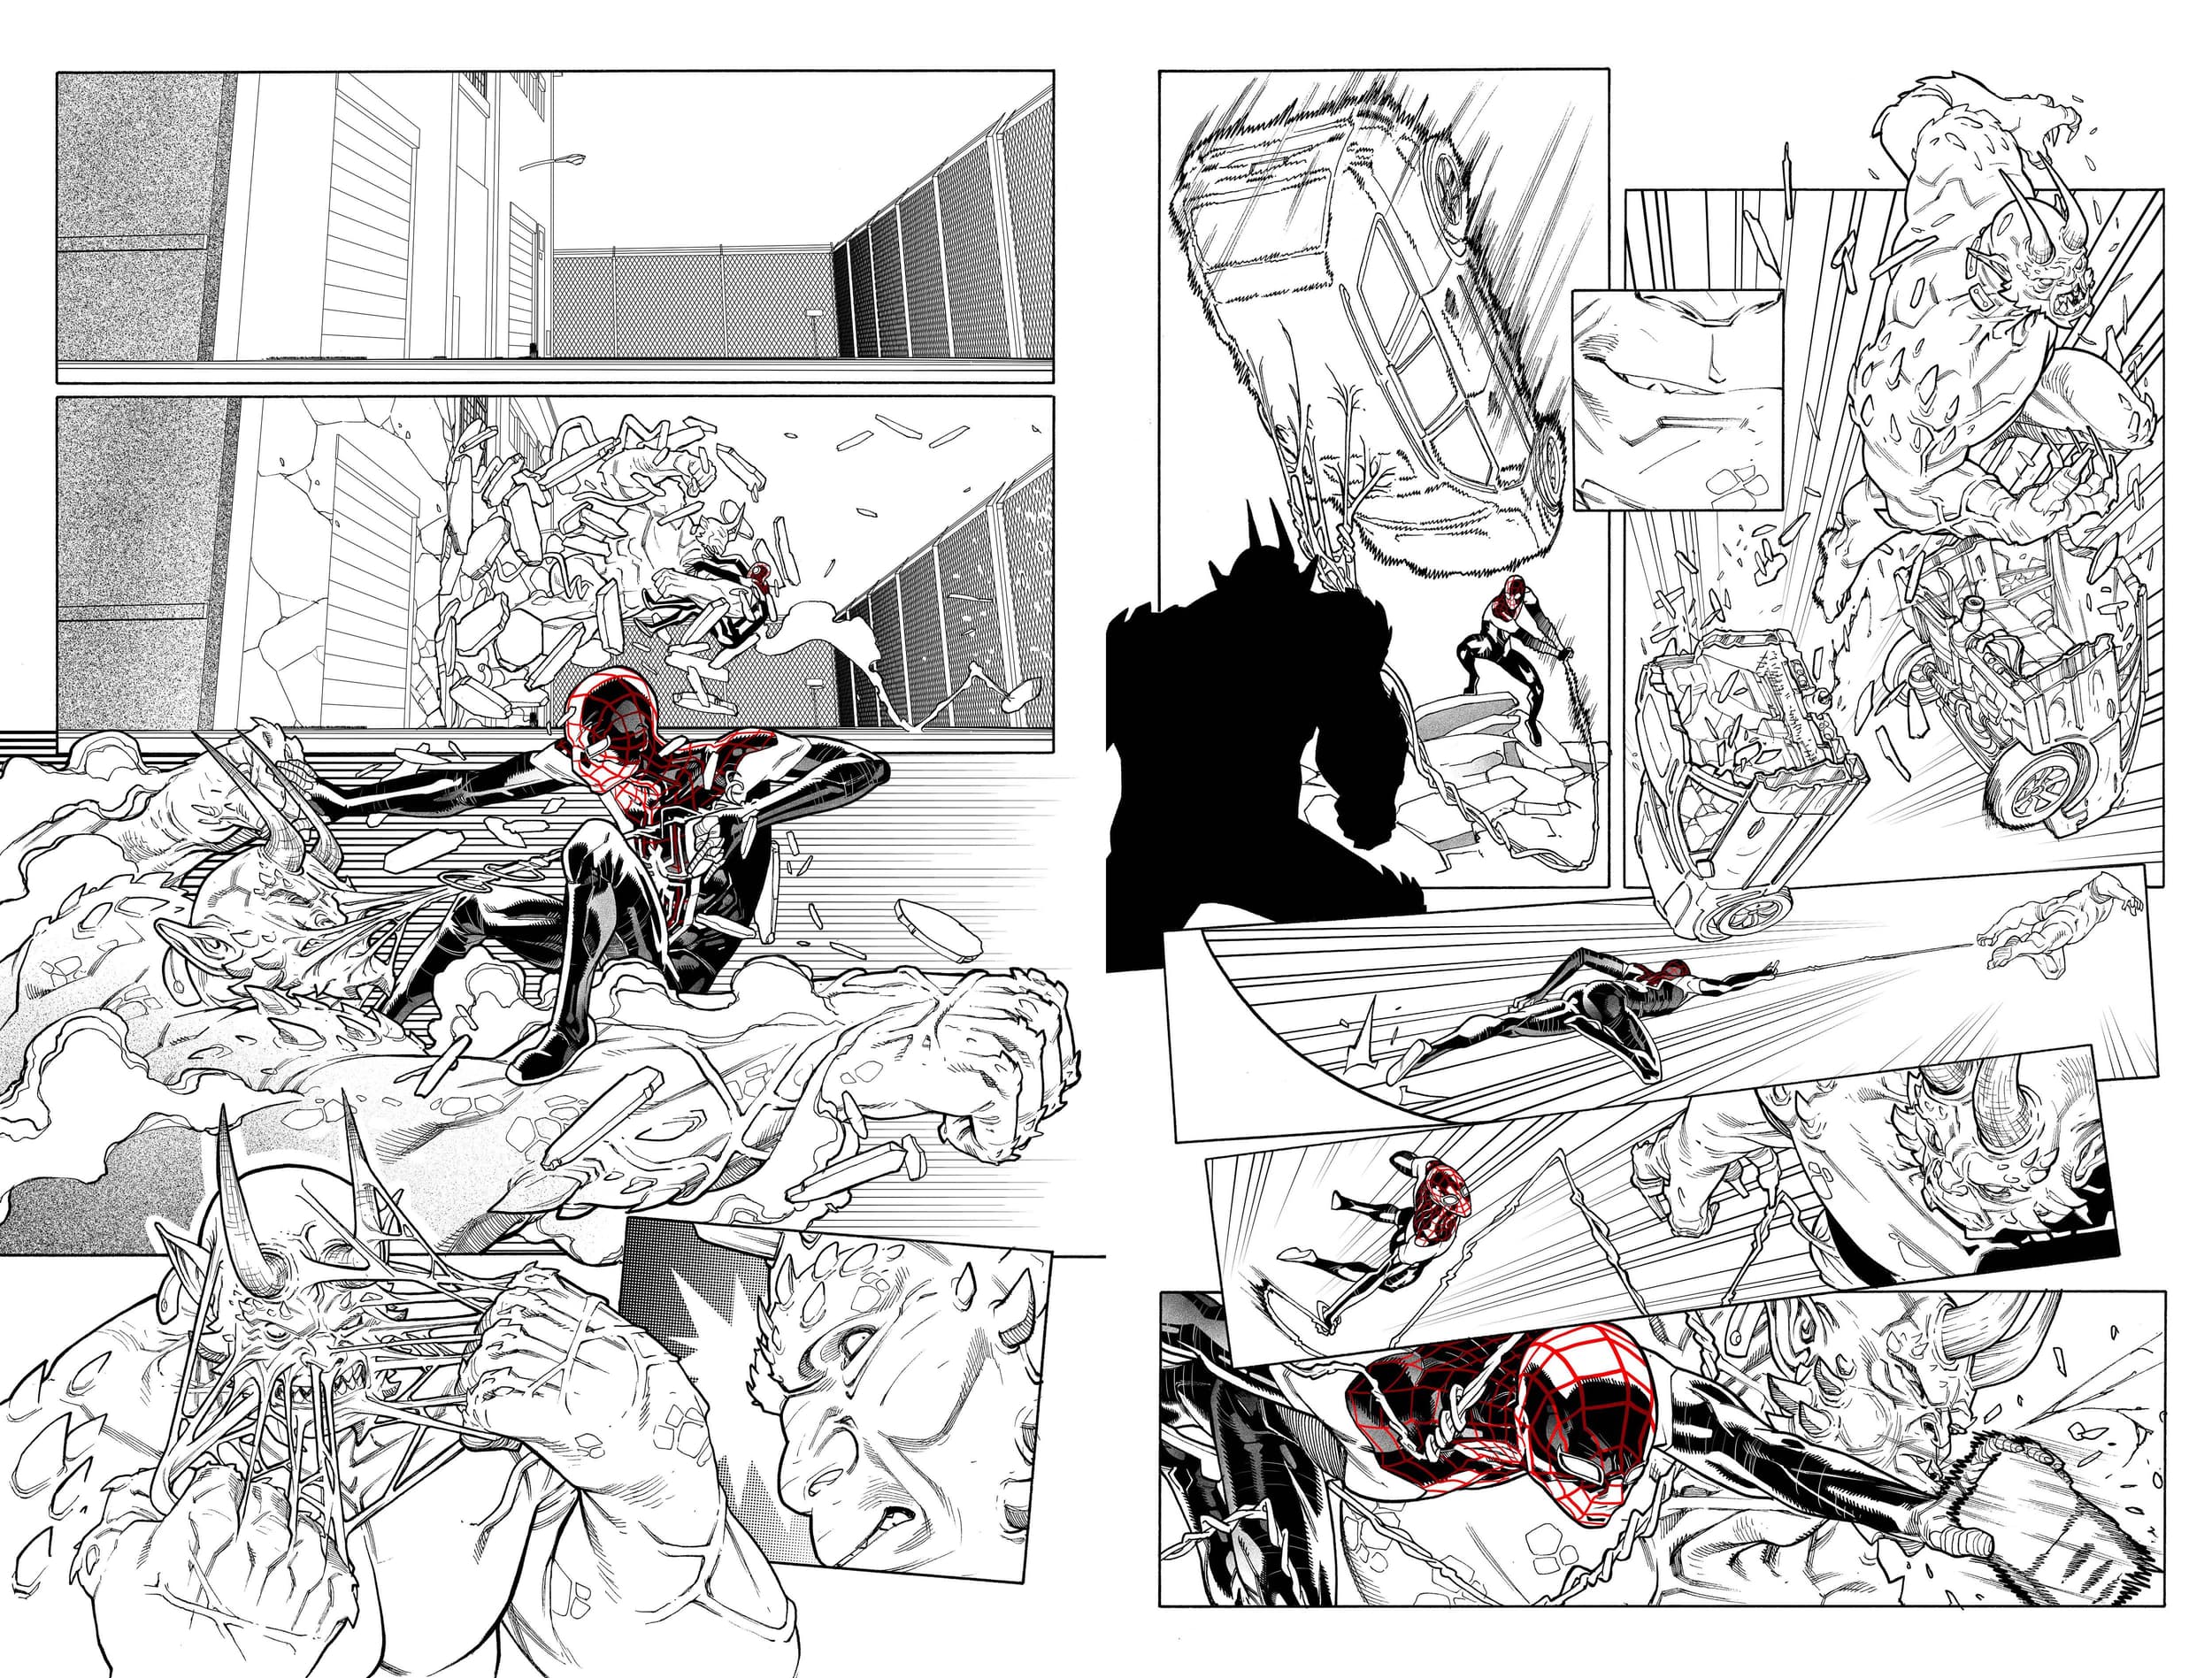 Process pages 13-14